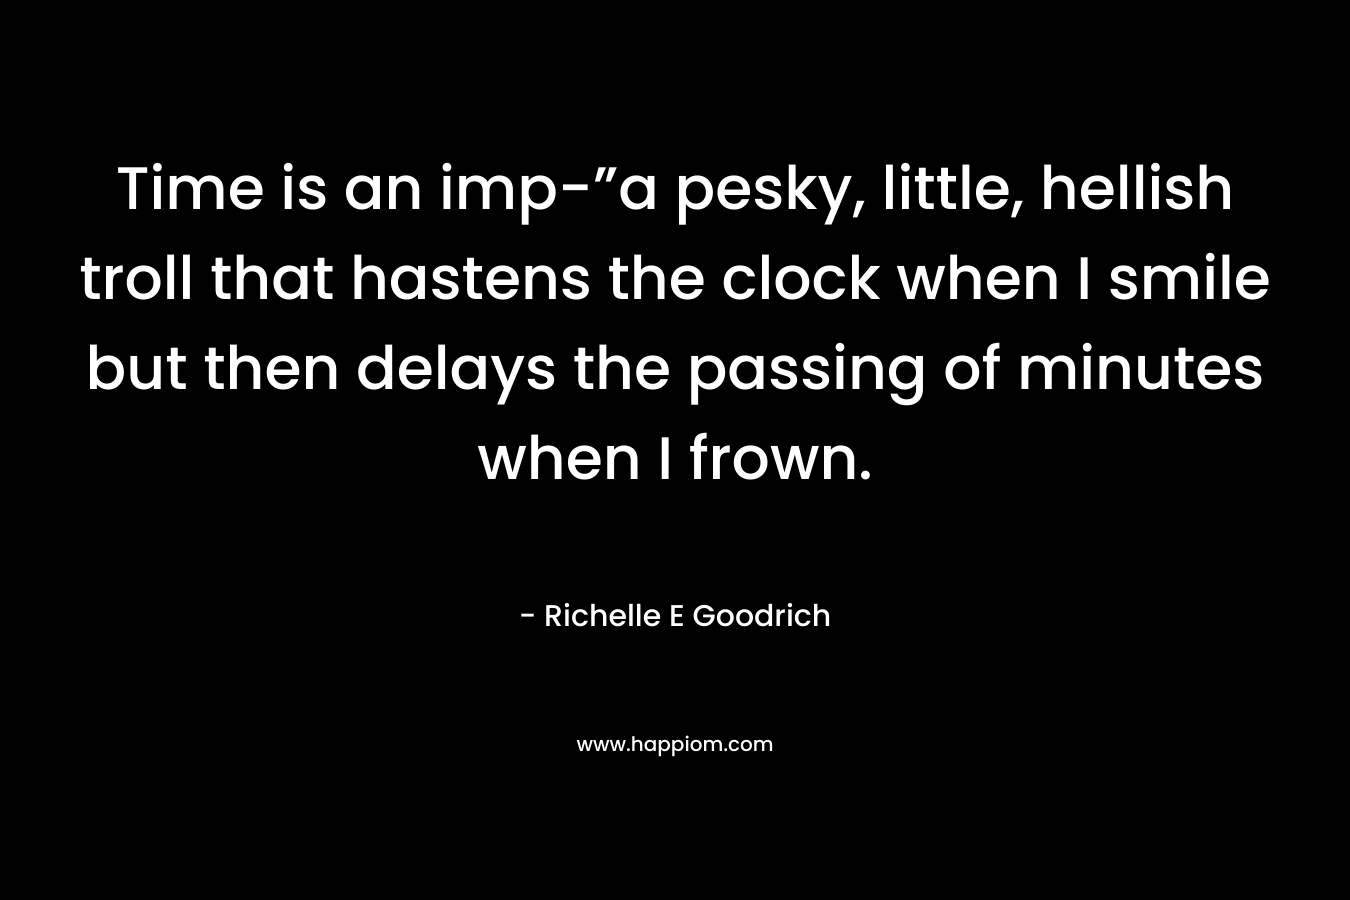 Time is an imp-”a pesky, little, hellish troll that hastens the clock when I smile but then delays the passing of minutes when I frown.